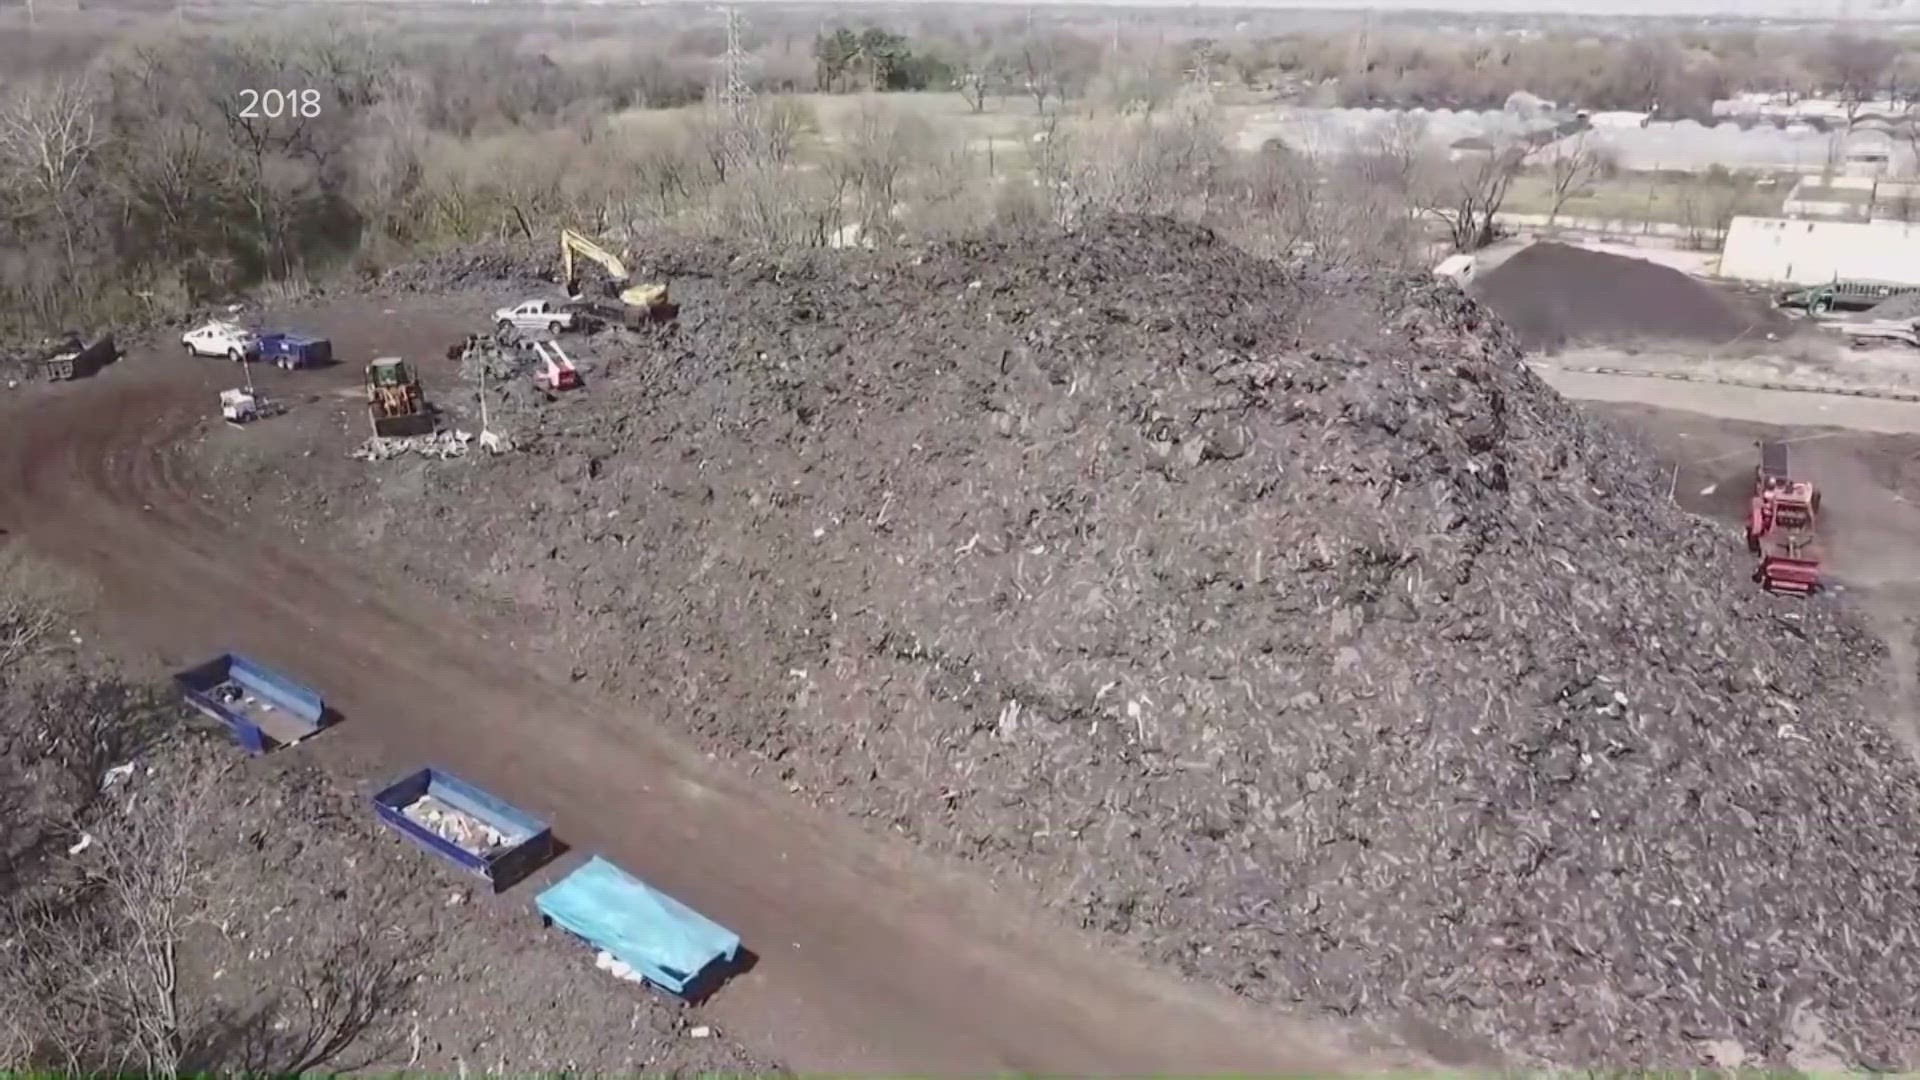 Monday, the city of Dallas began taking away soil from the former "Blue Star" recycling site.